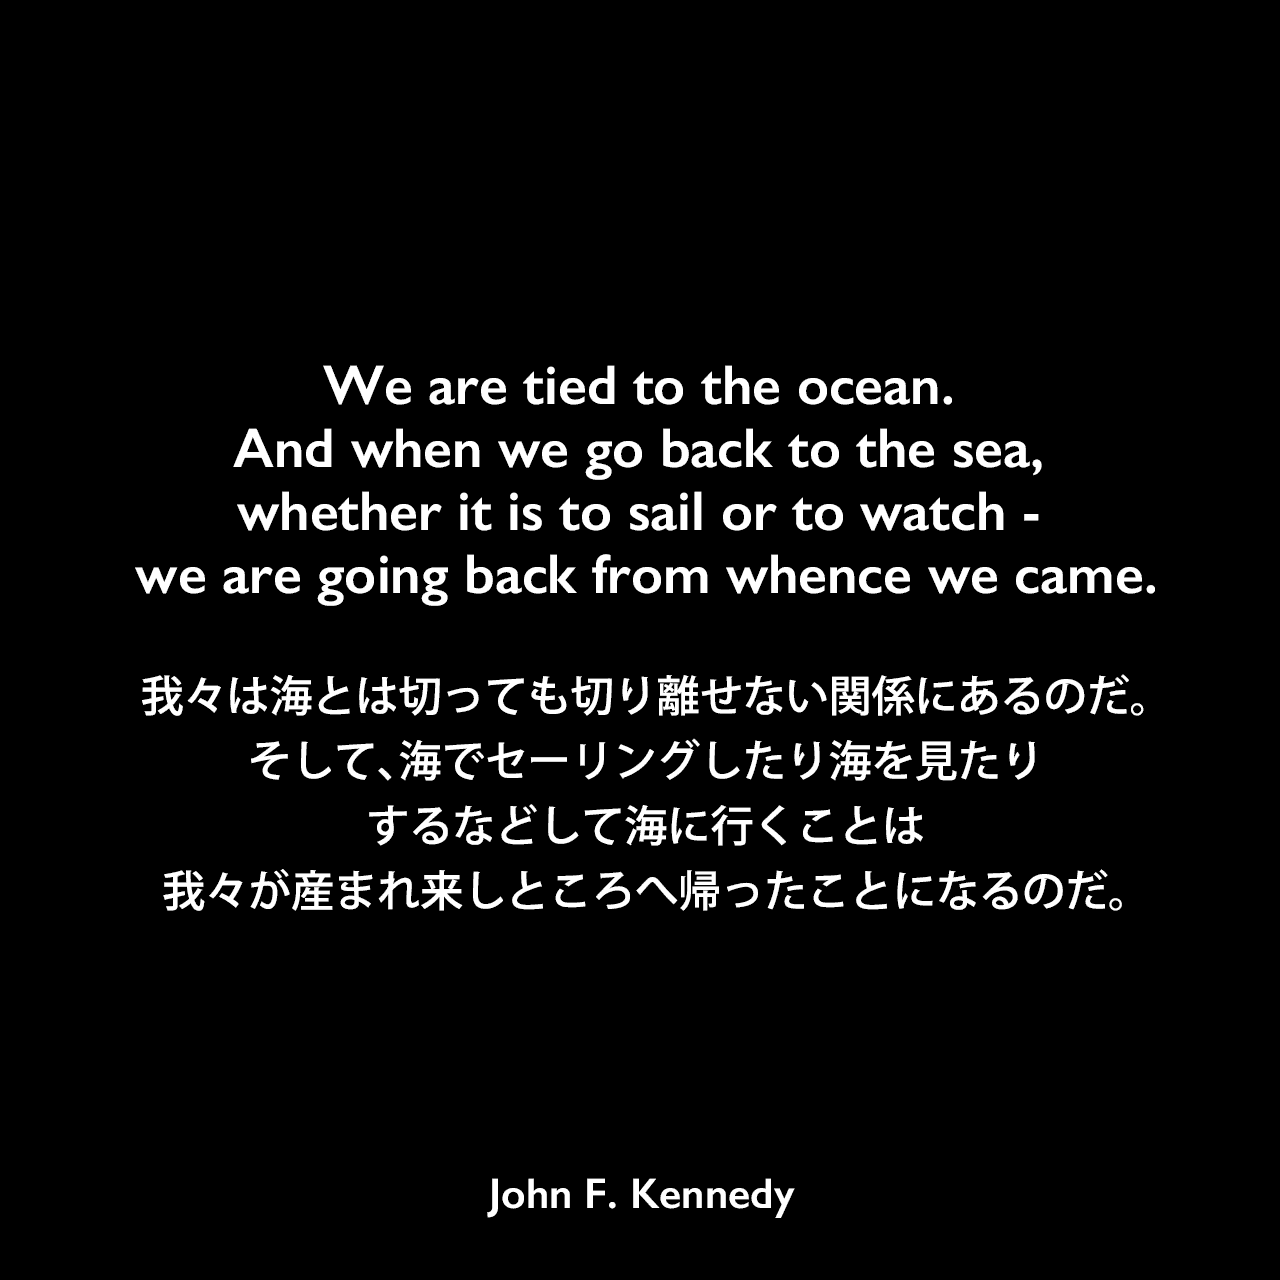 We are tied to the ocean. And when we go back to the sea, whether it is to sail or to watch - we are going back from whence we came.我々は海とは切っても切り離せない関係にあるのだ。そして、海でセーリングしたり海を見たりするなどして海に行くことは、我々が産まれ来しところへ帰ったことになるのだ。John F Kennedy